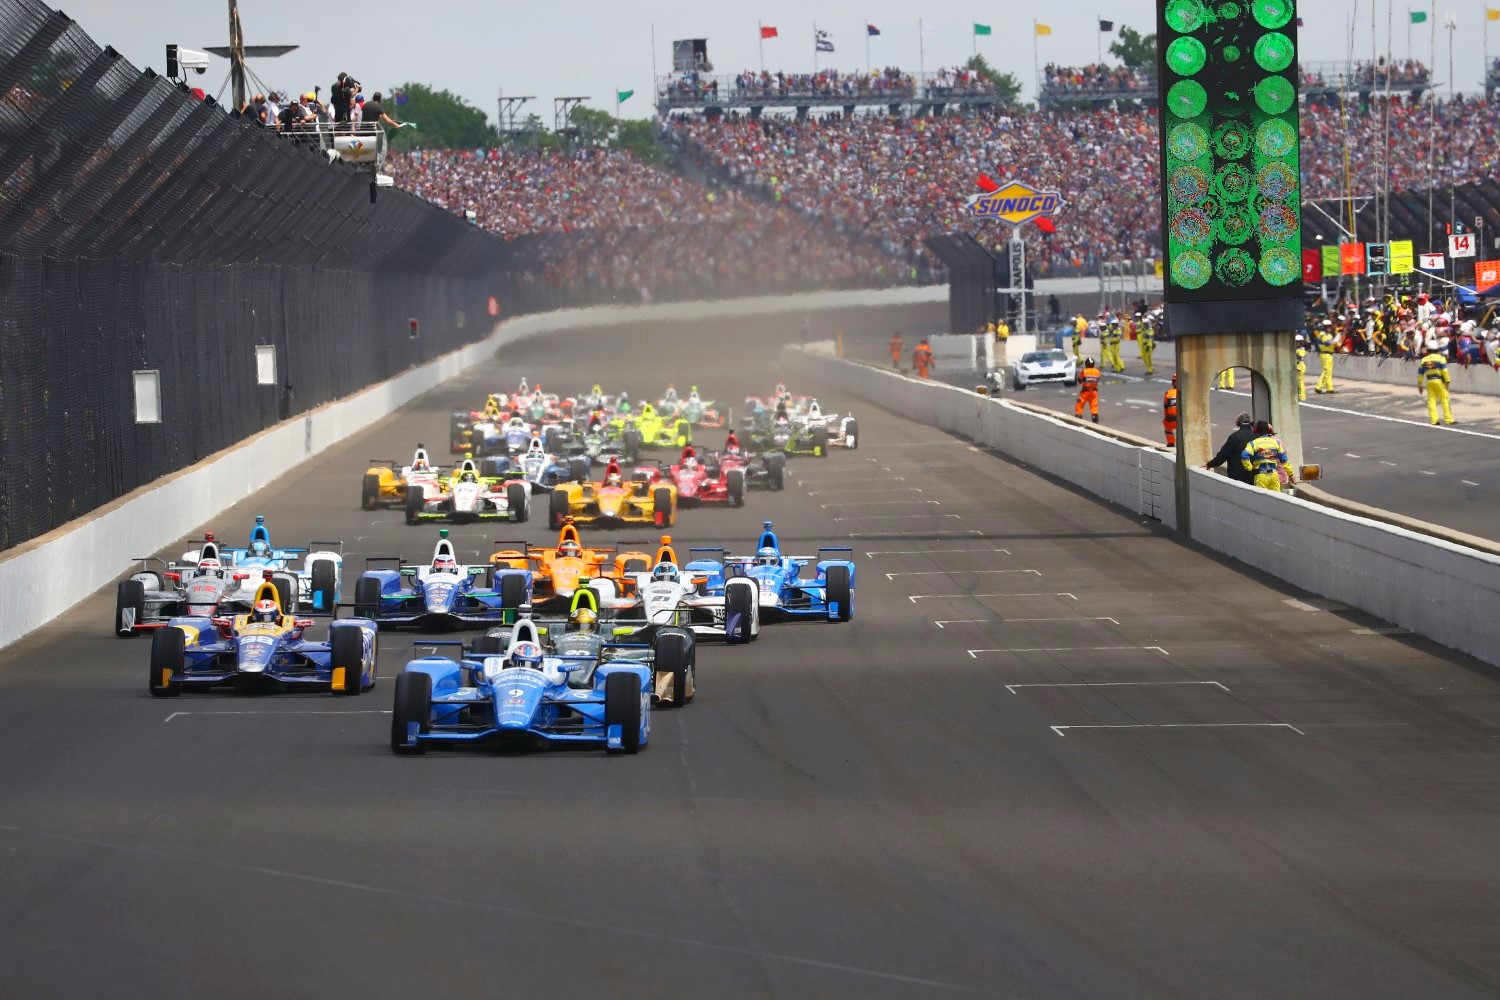 Why isn't it a national commercial for the IndyCar Series, including the Indy 500? Because the family only cares about one thing - their Indy 500.